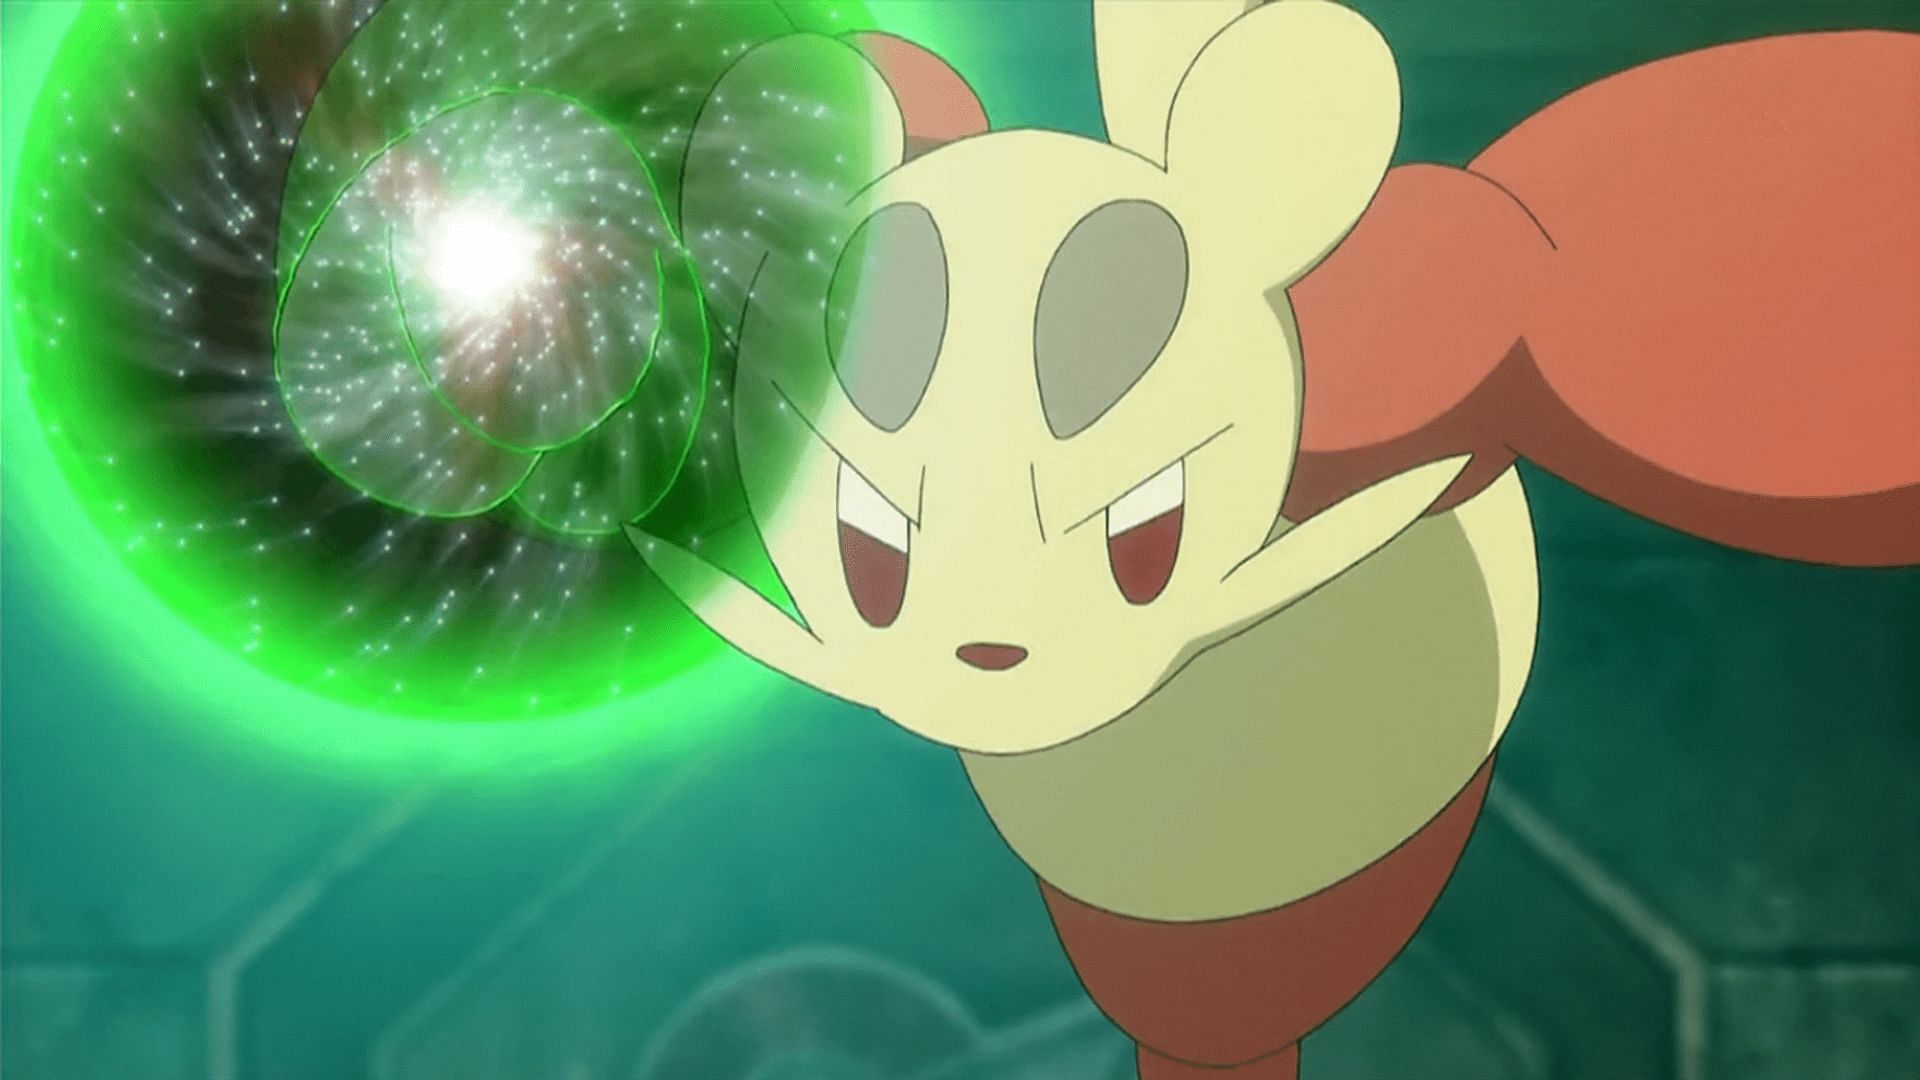 Meinfoo preparing Drain Punch as seen in the anime (Image via The Pokemon Company)